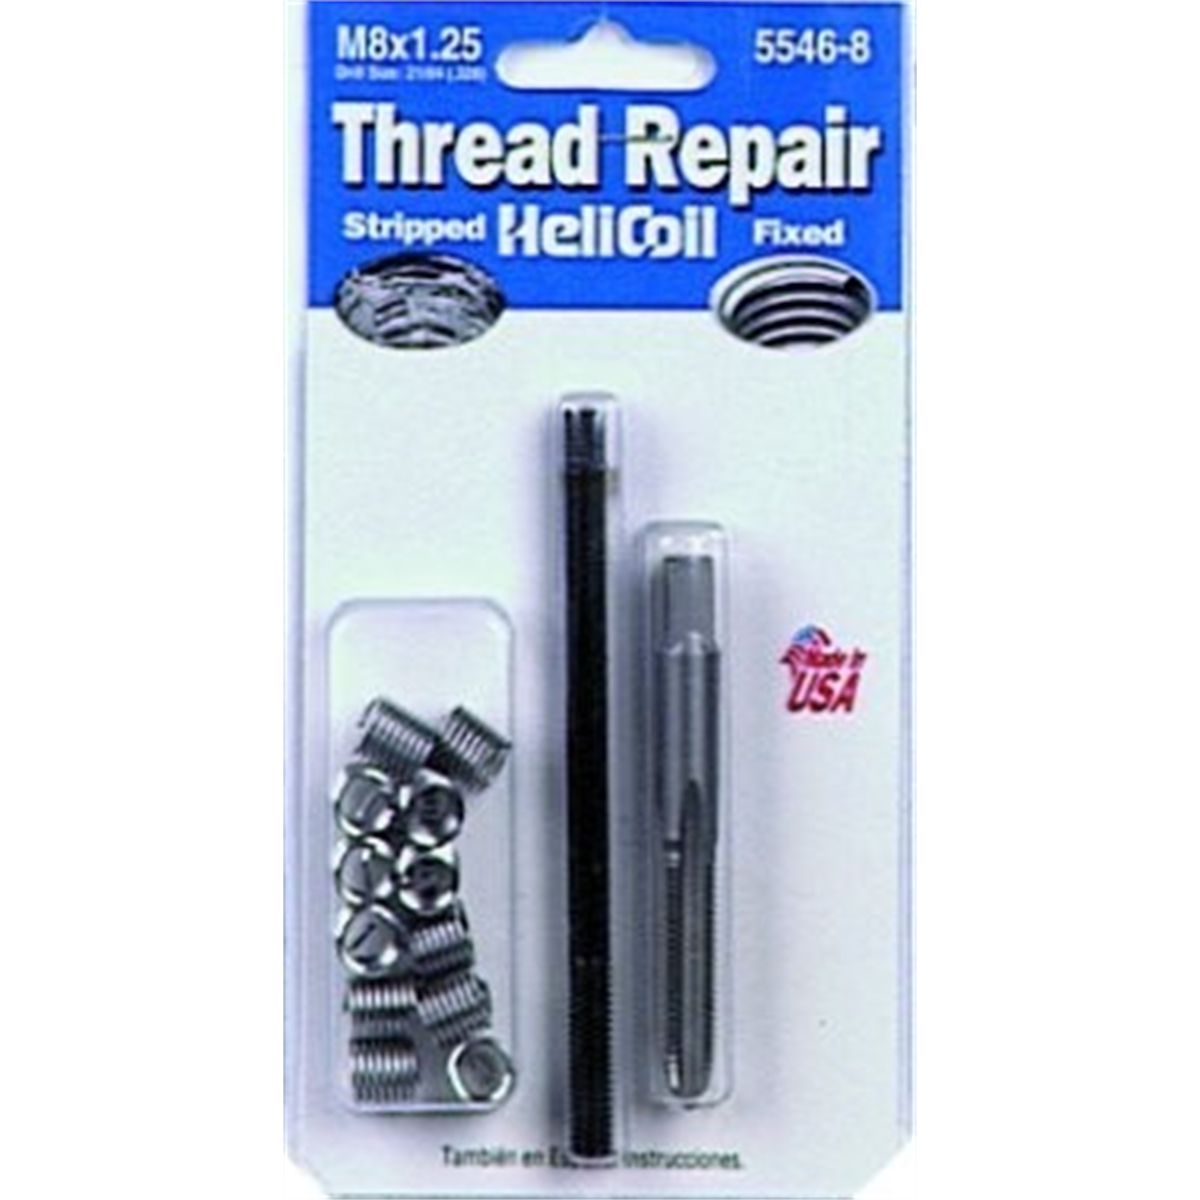 Details about   140Pcs Stripped Thread Rethread Helicoil Repair Insert Kit/Set Metric M3-M12 New 